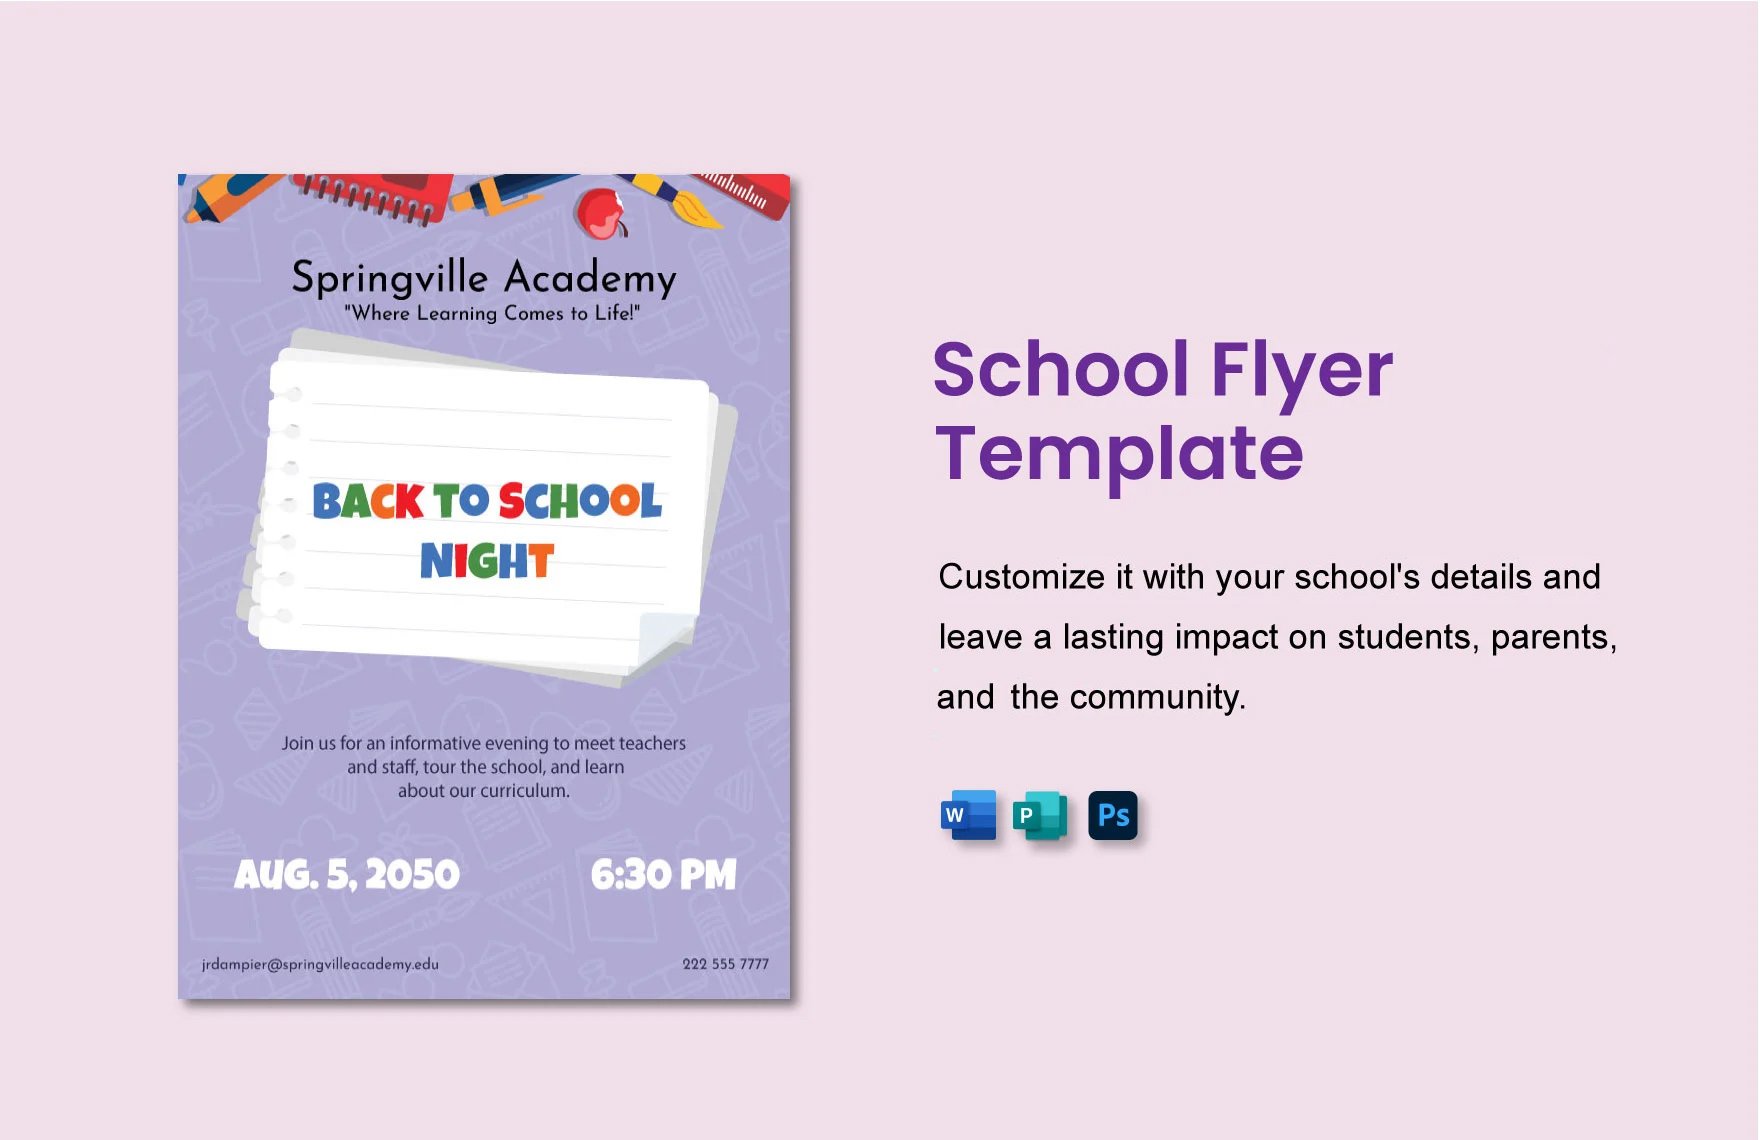 Free School Flyer Template in Word, PSD, Publisher